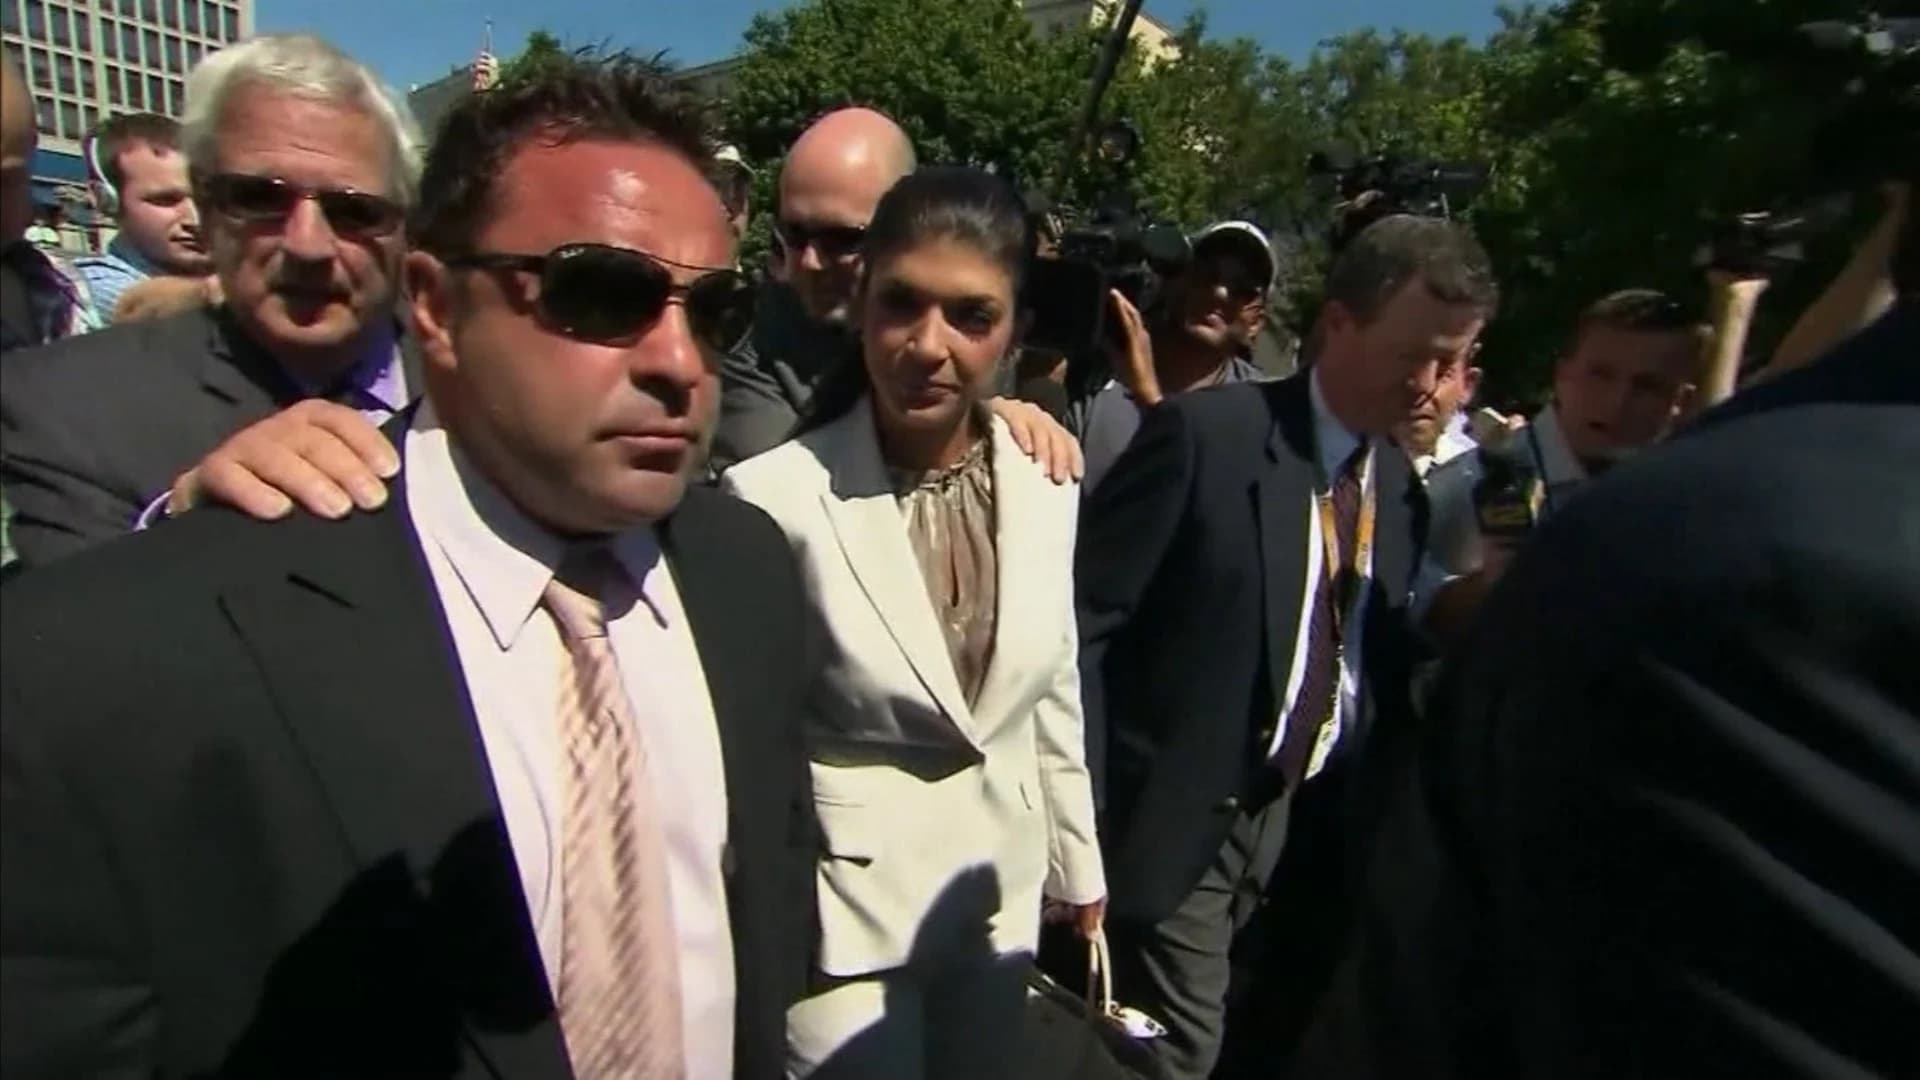 Report: Joe Giudice, of ‘Real Housewives’ fame, to remain behind bars indefinitely